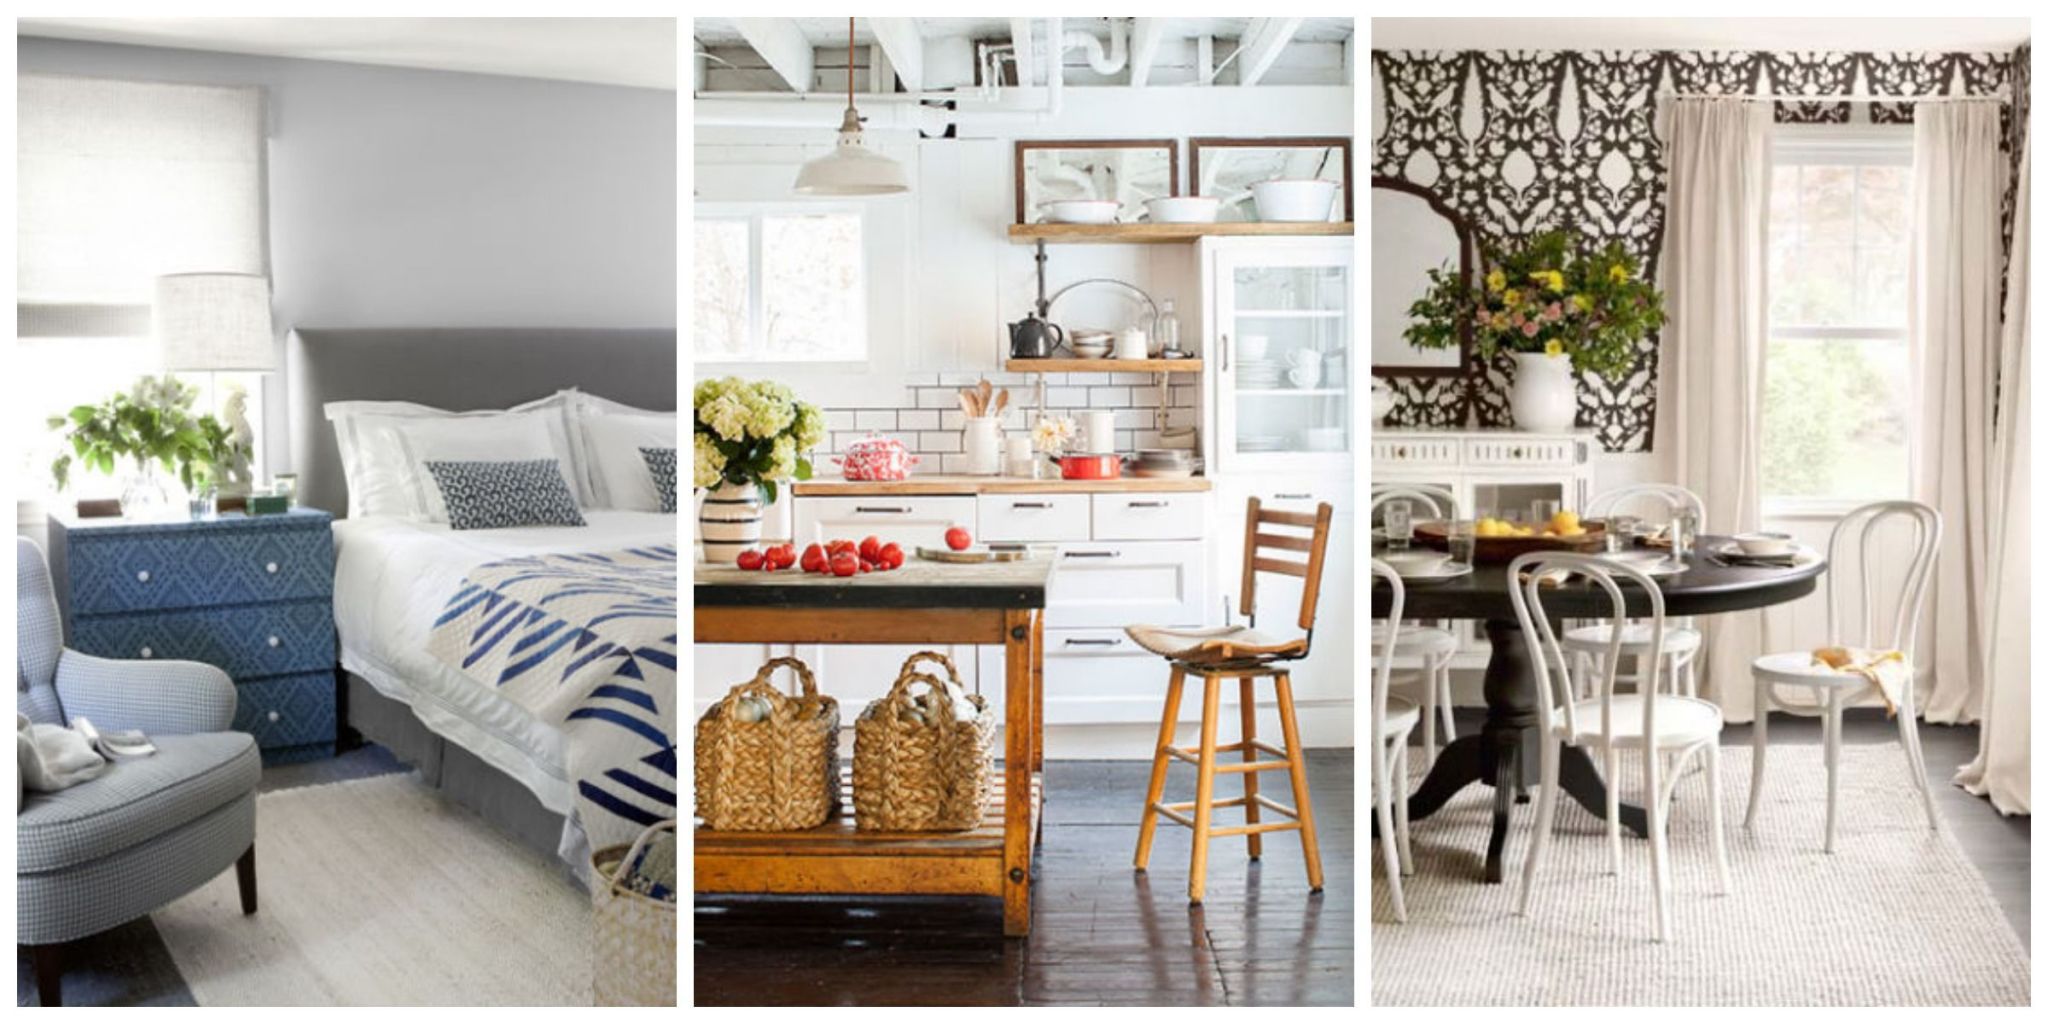 65 Home Makeover Ideas - Before and After Home Makeovers